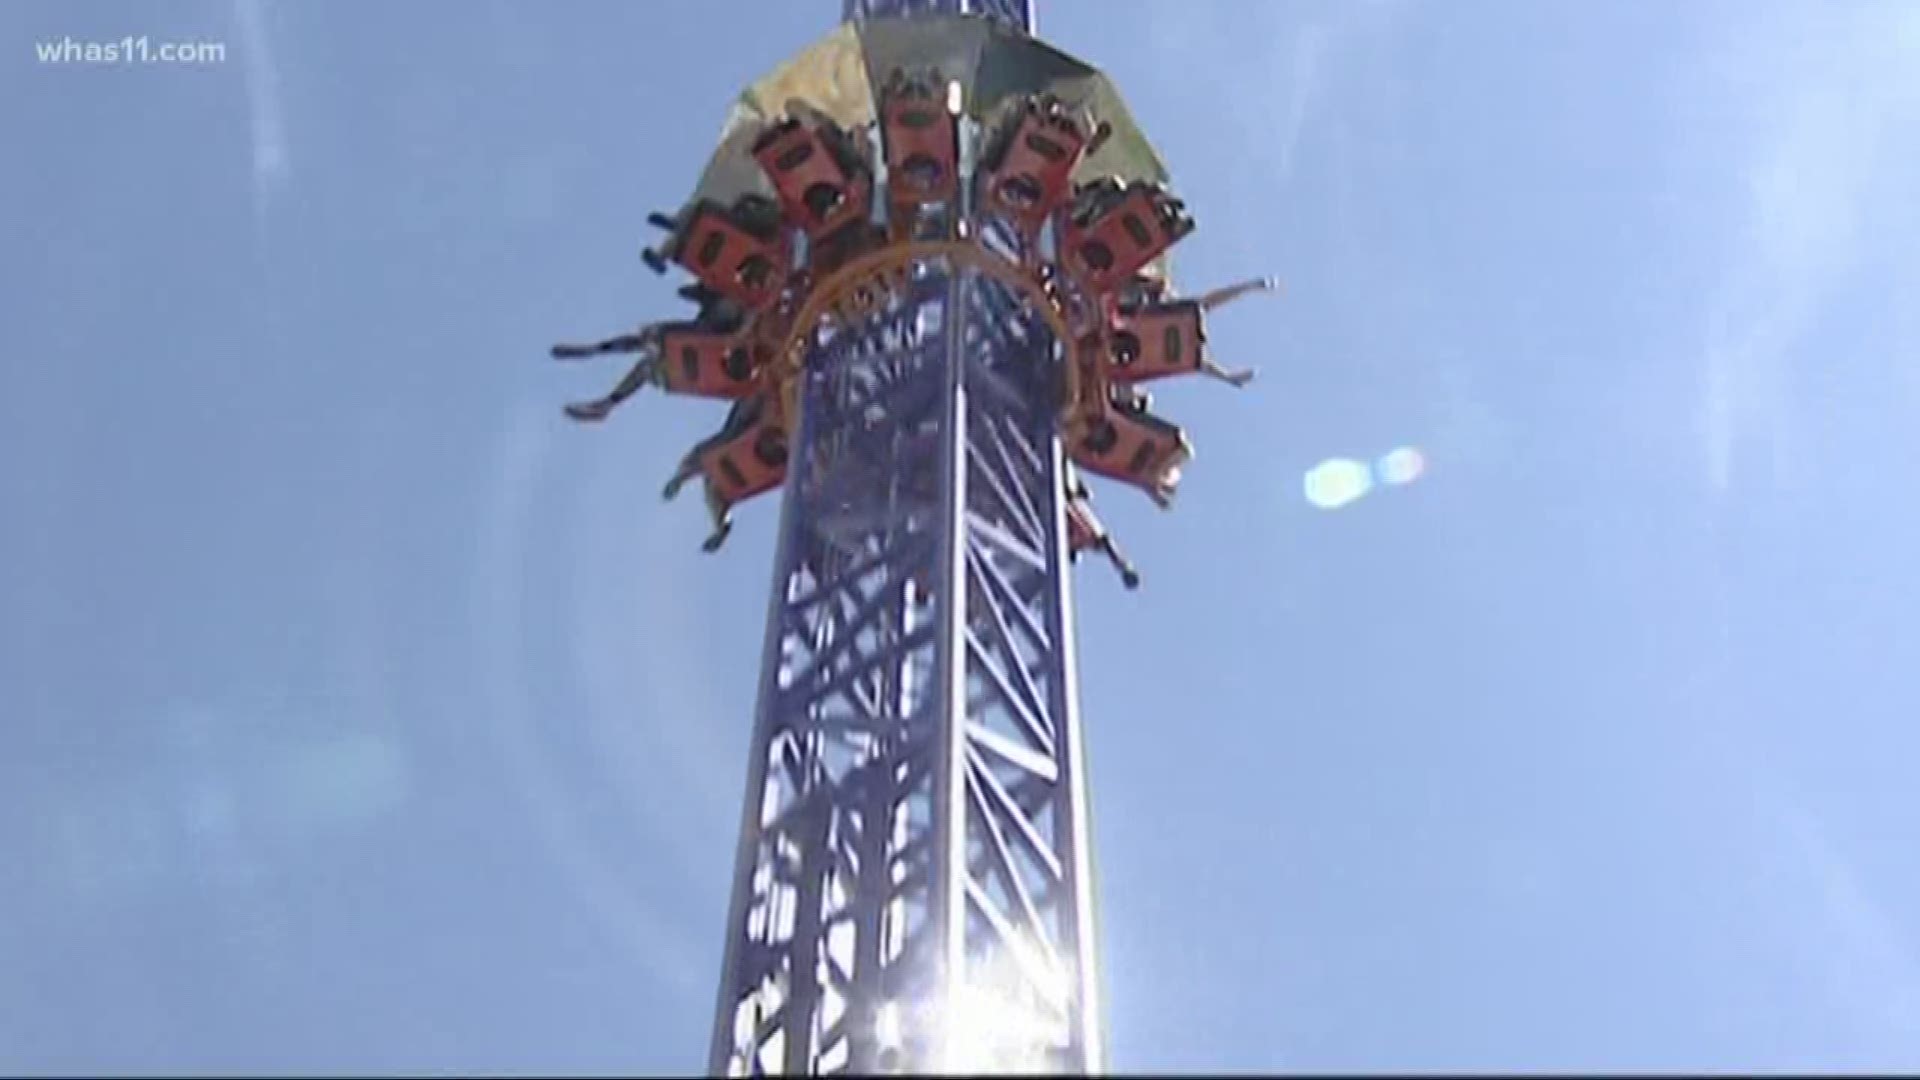 A person is expected to be okay after being hurt on a ride at Kentucky Kingdom.